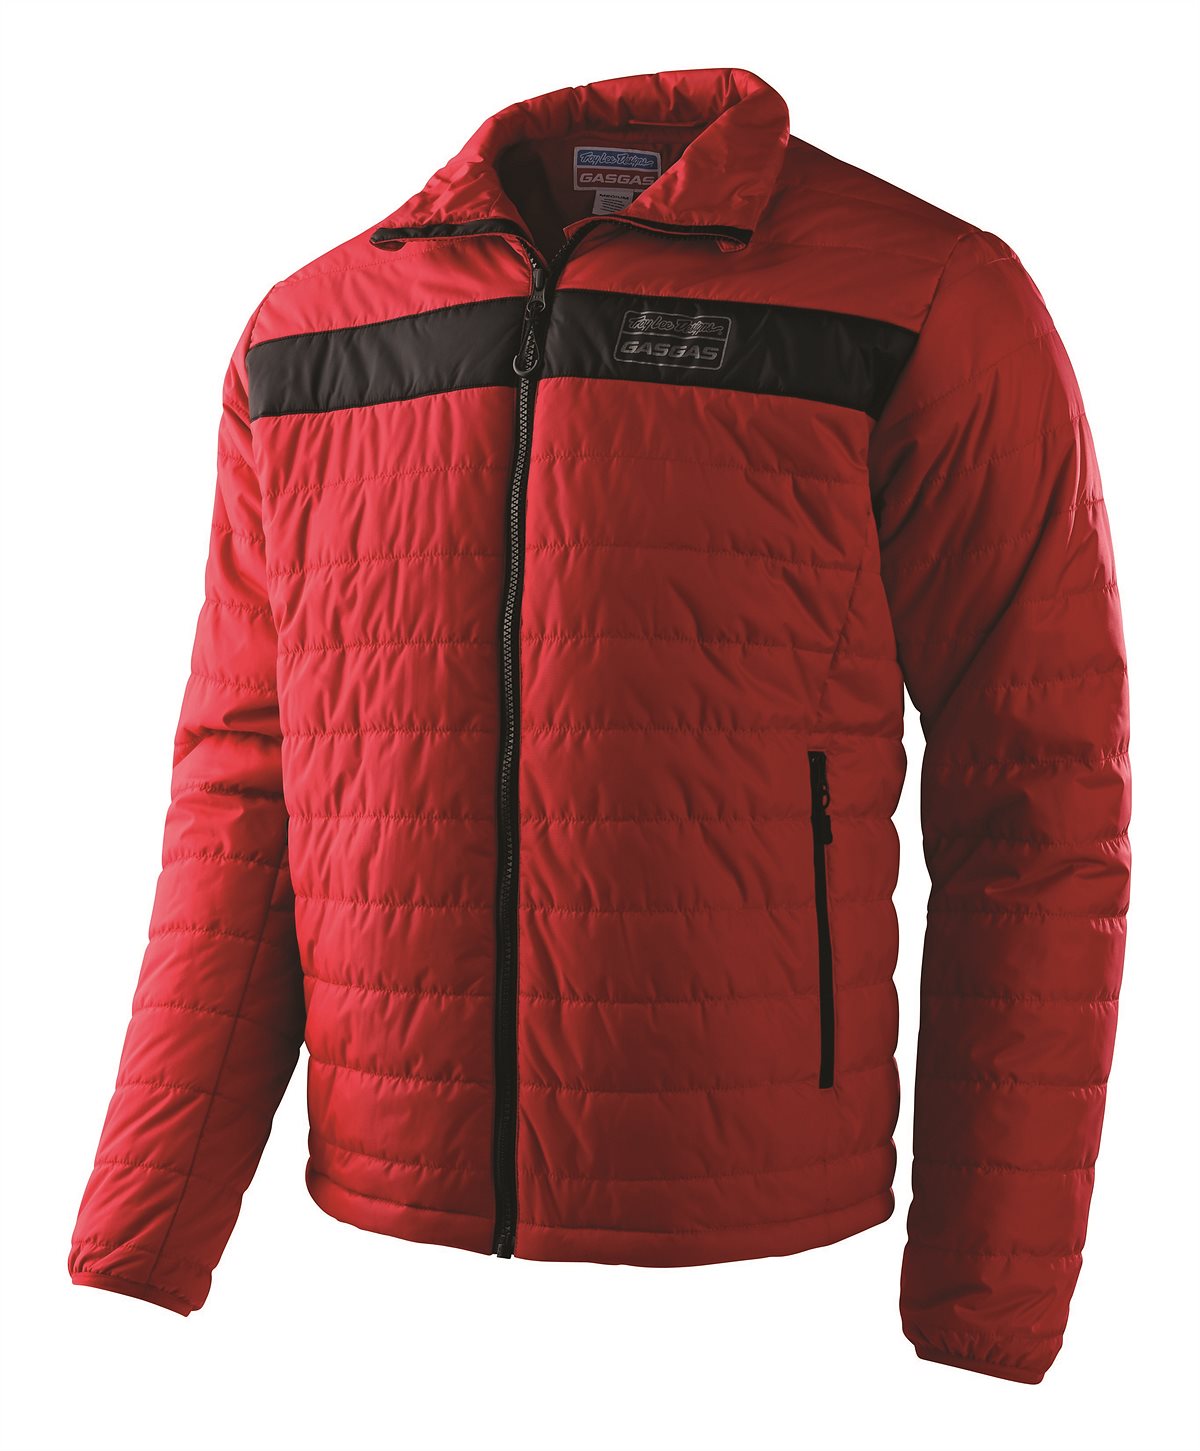 52846_3GG23005150X_TLD Team Puff Jacket_front